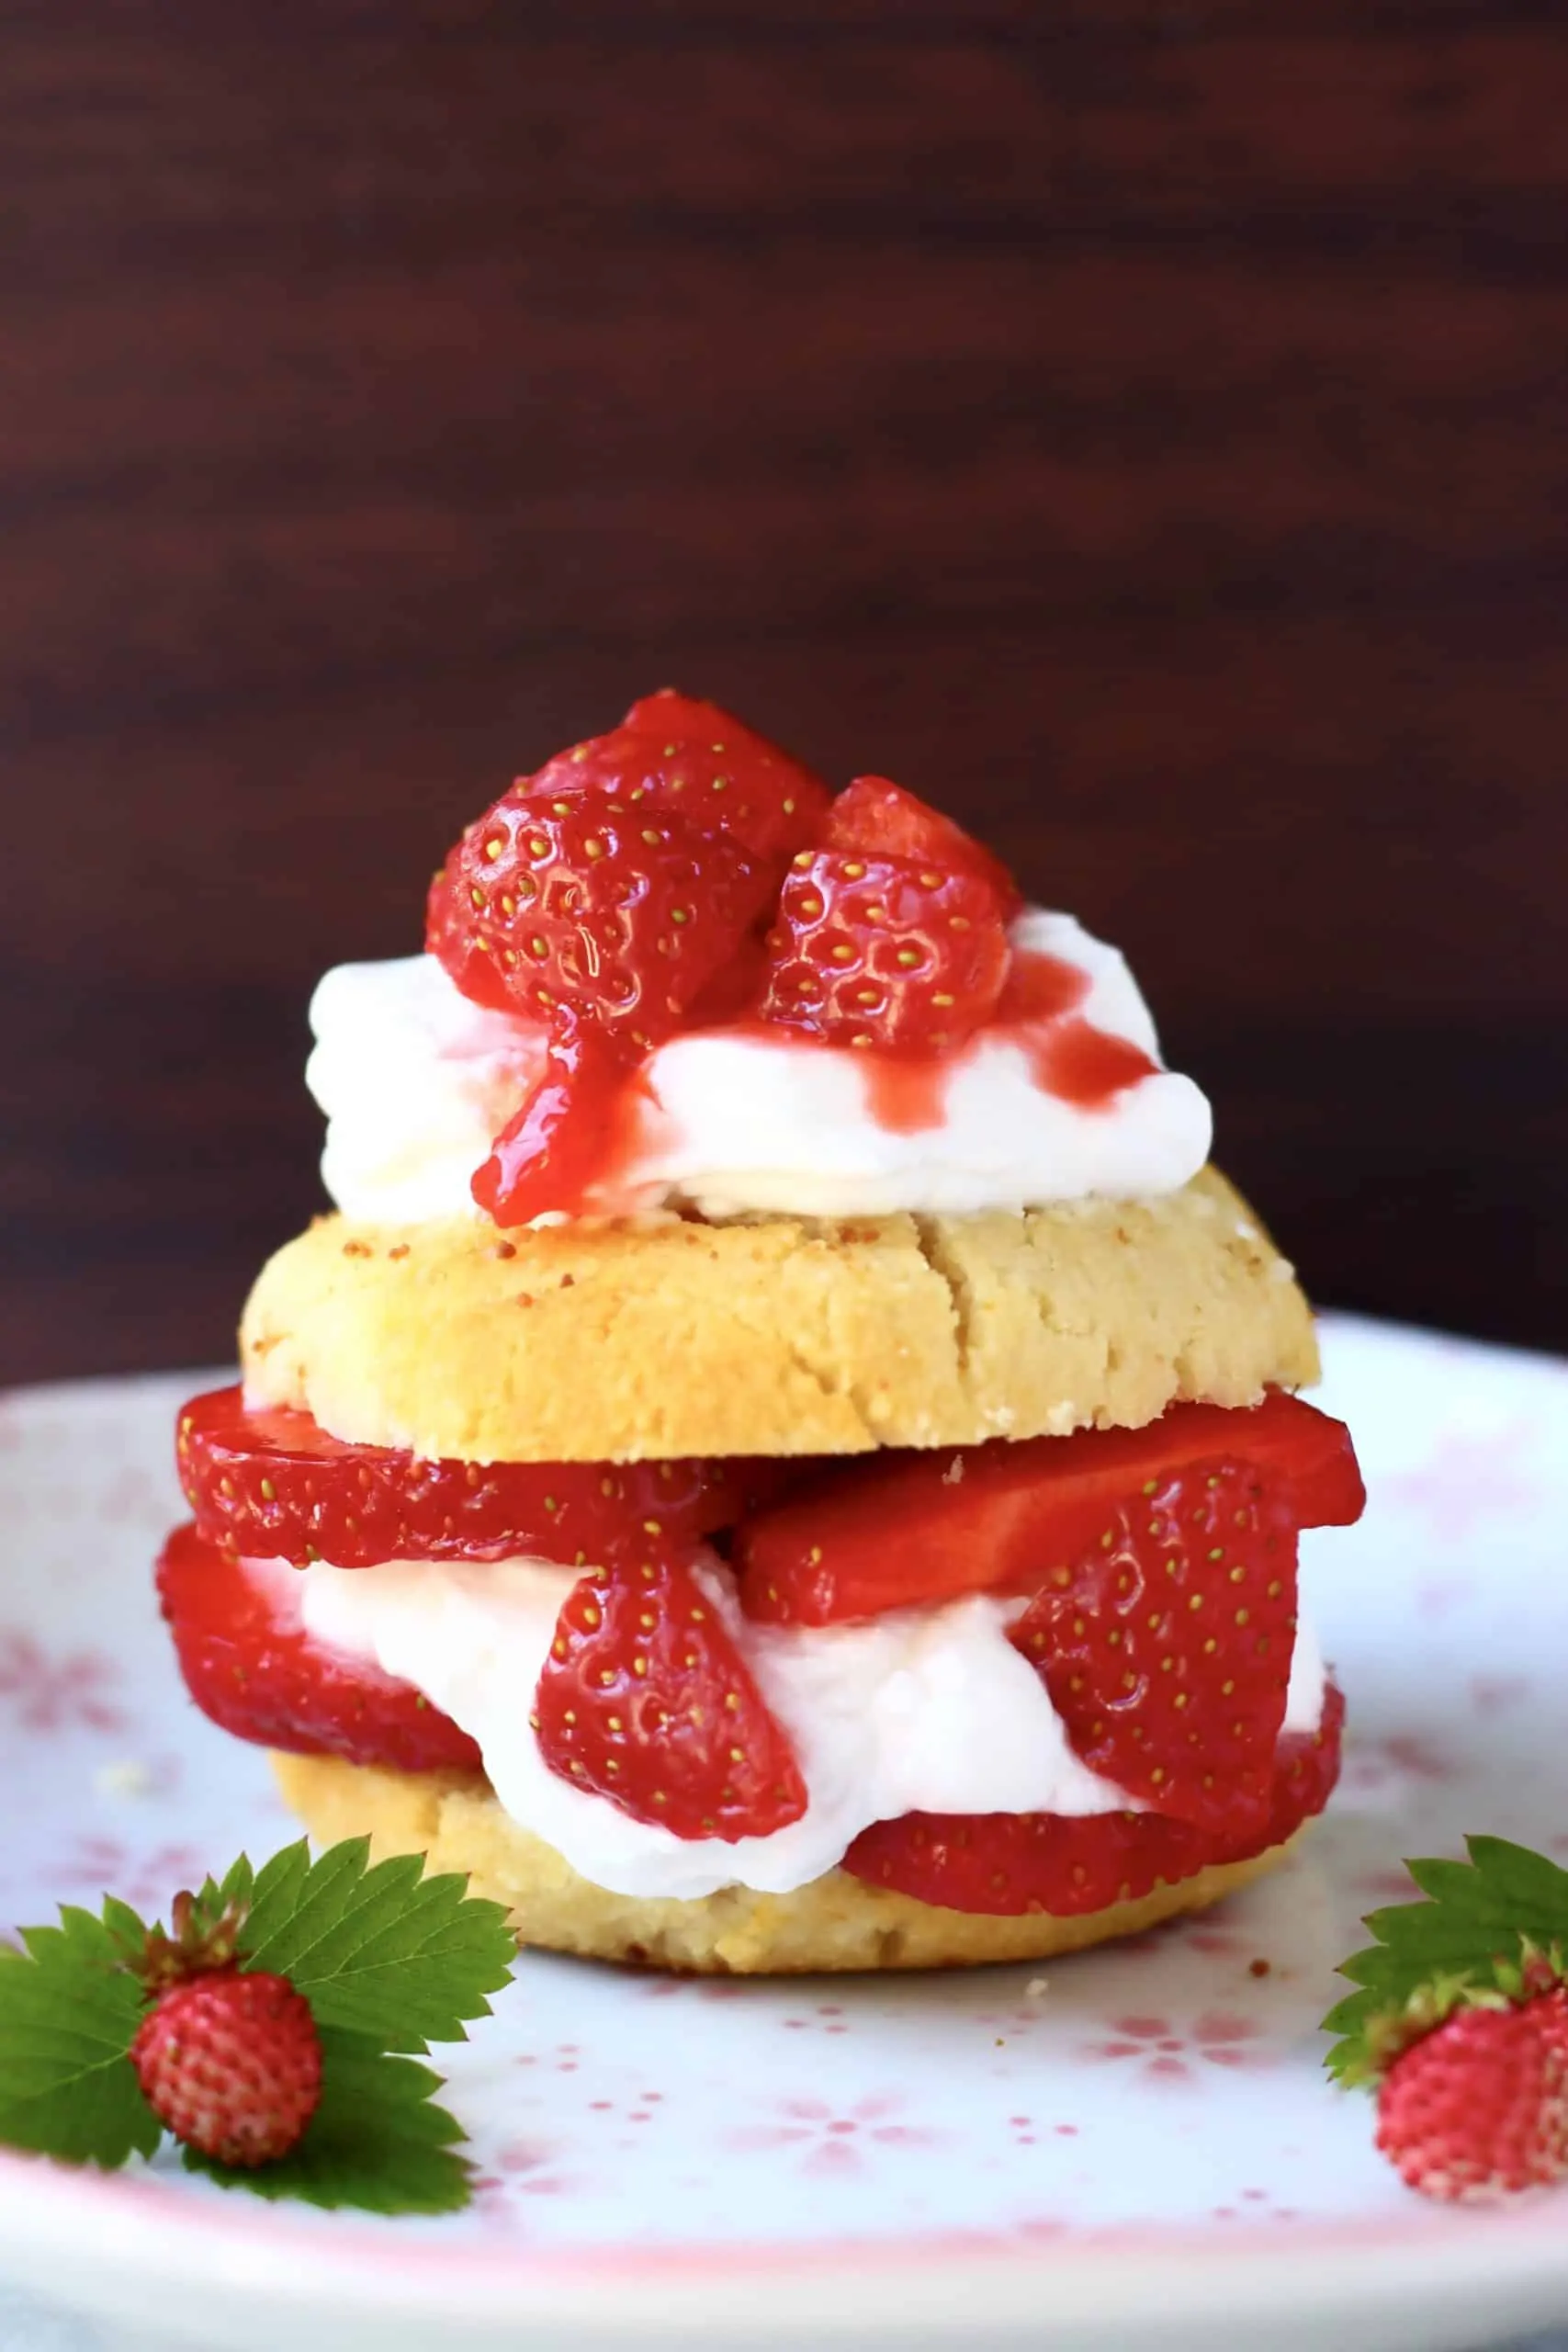 Vegan strawberry shortcake with cream and fresh strawberries on a plate